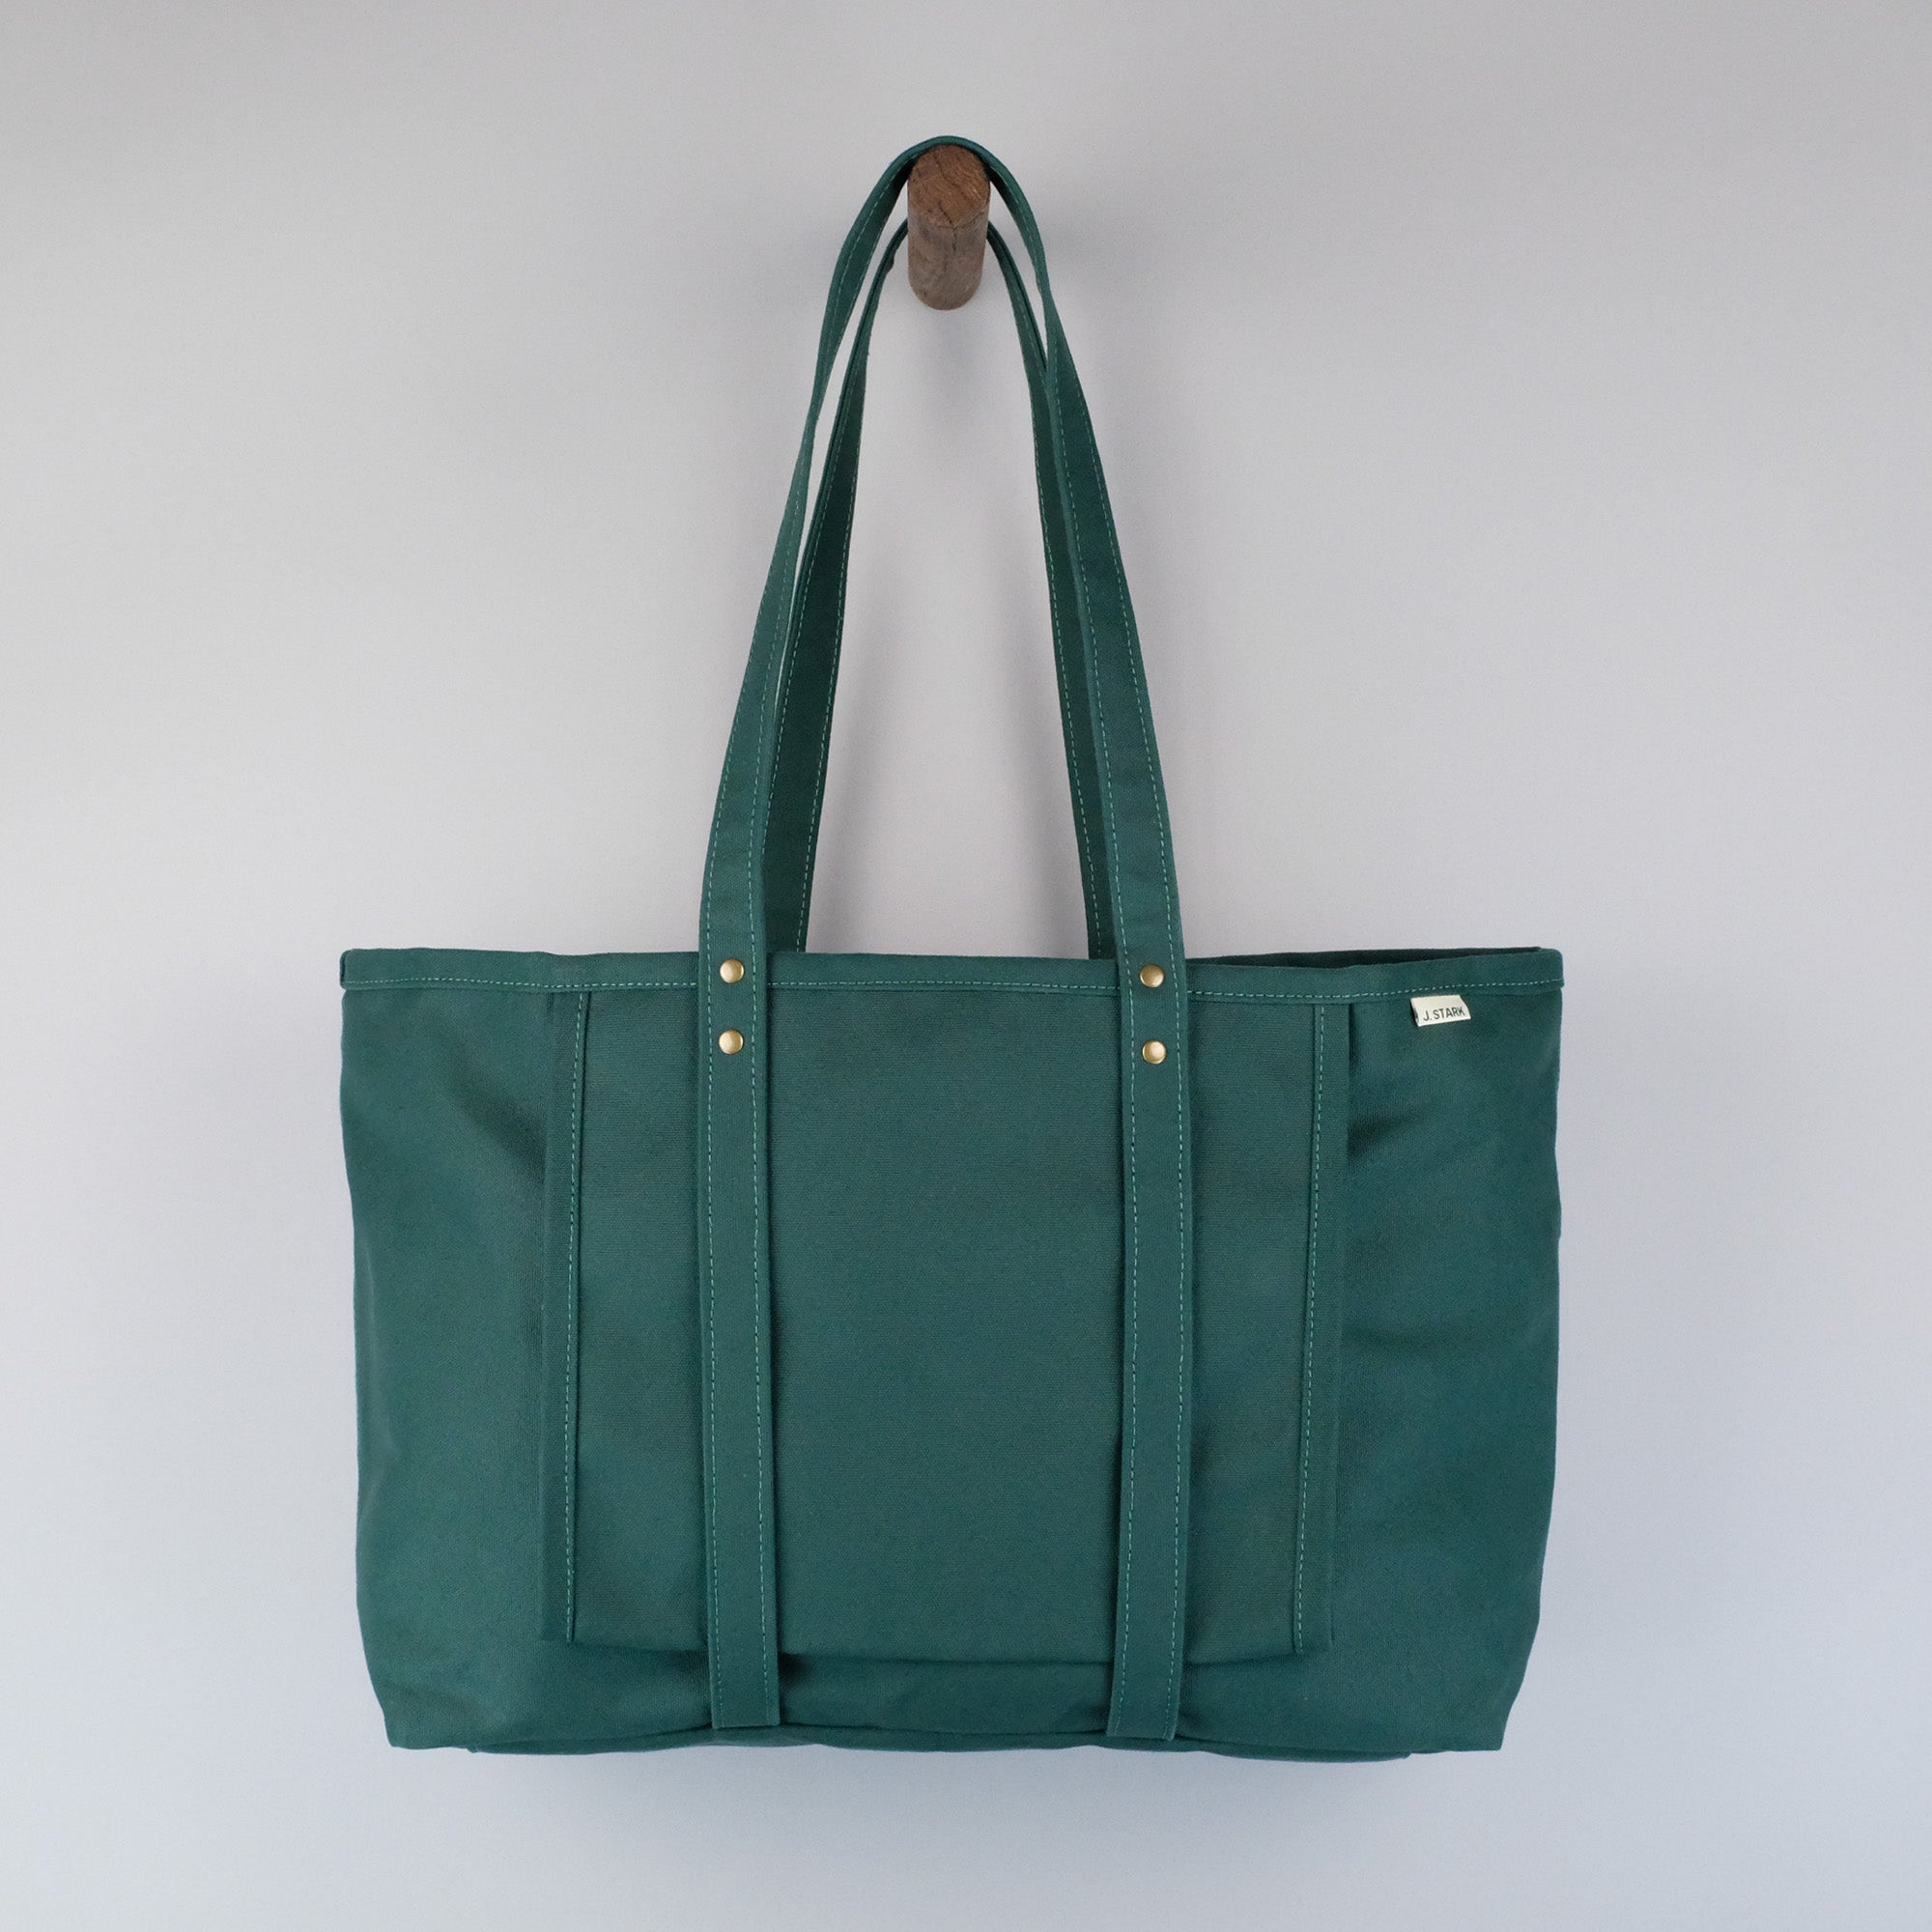 Everyday Cotton Tote Small: Made for the everyday